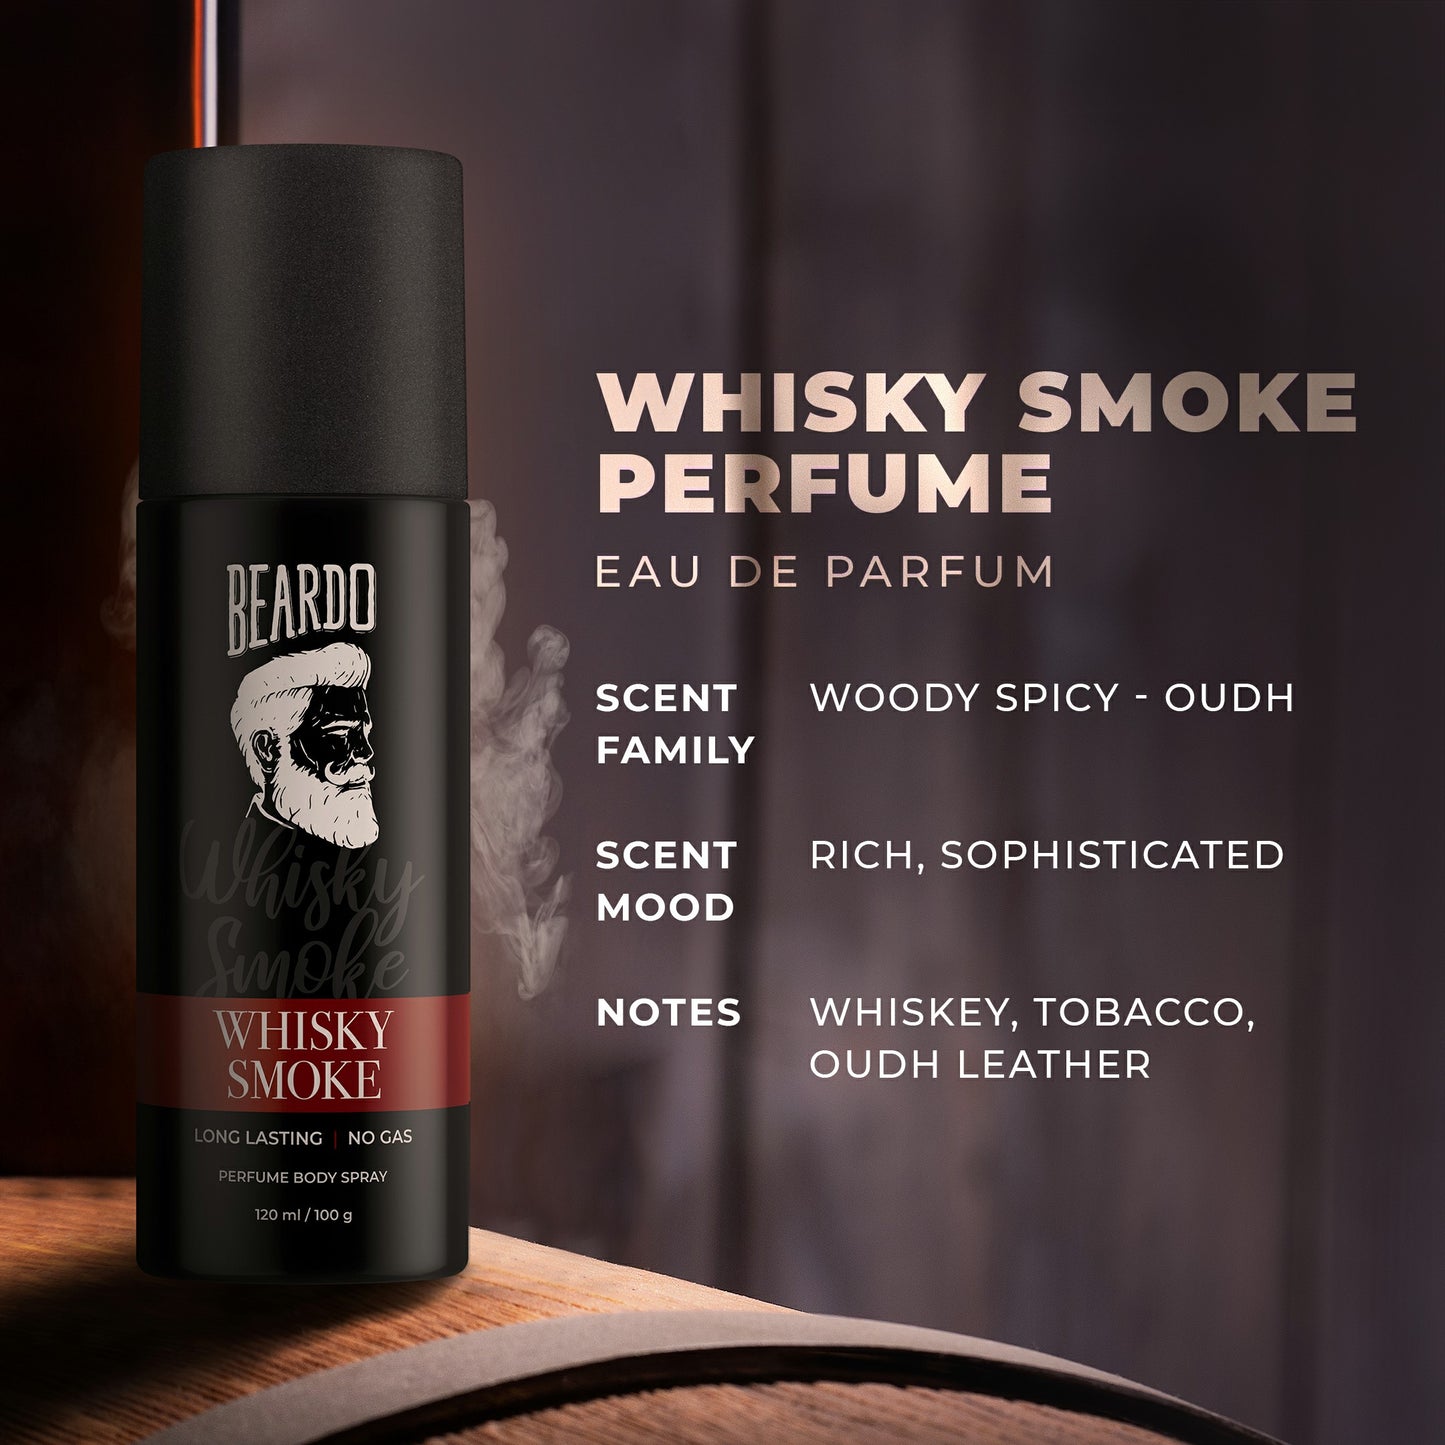 woody notes, rich, sophisticated, oudh leather